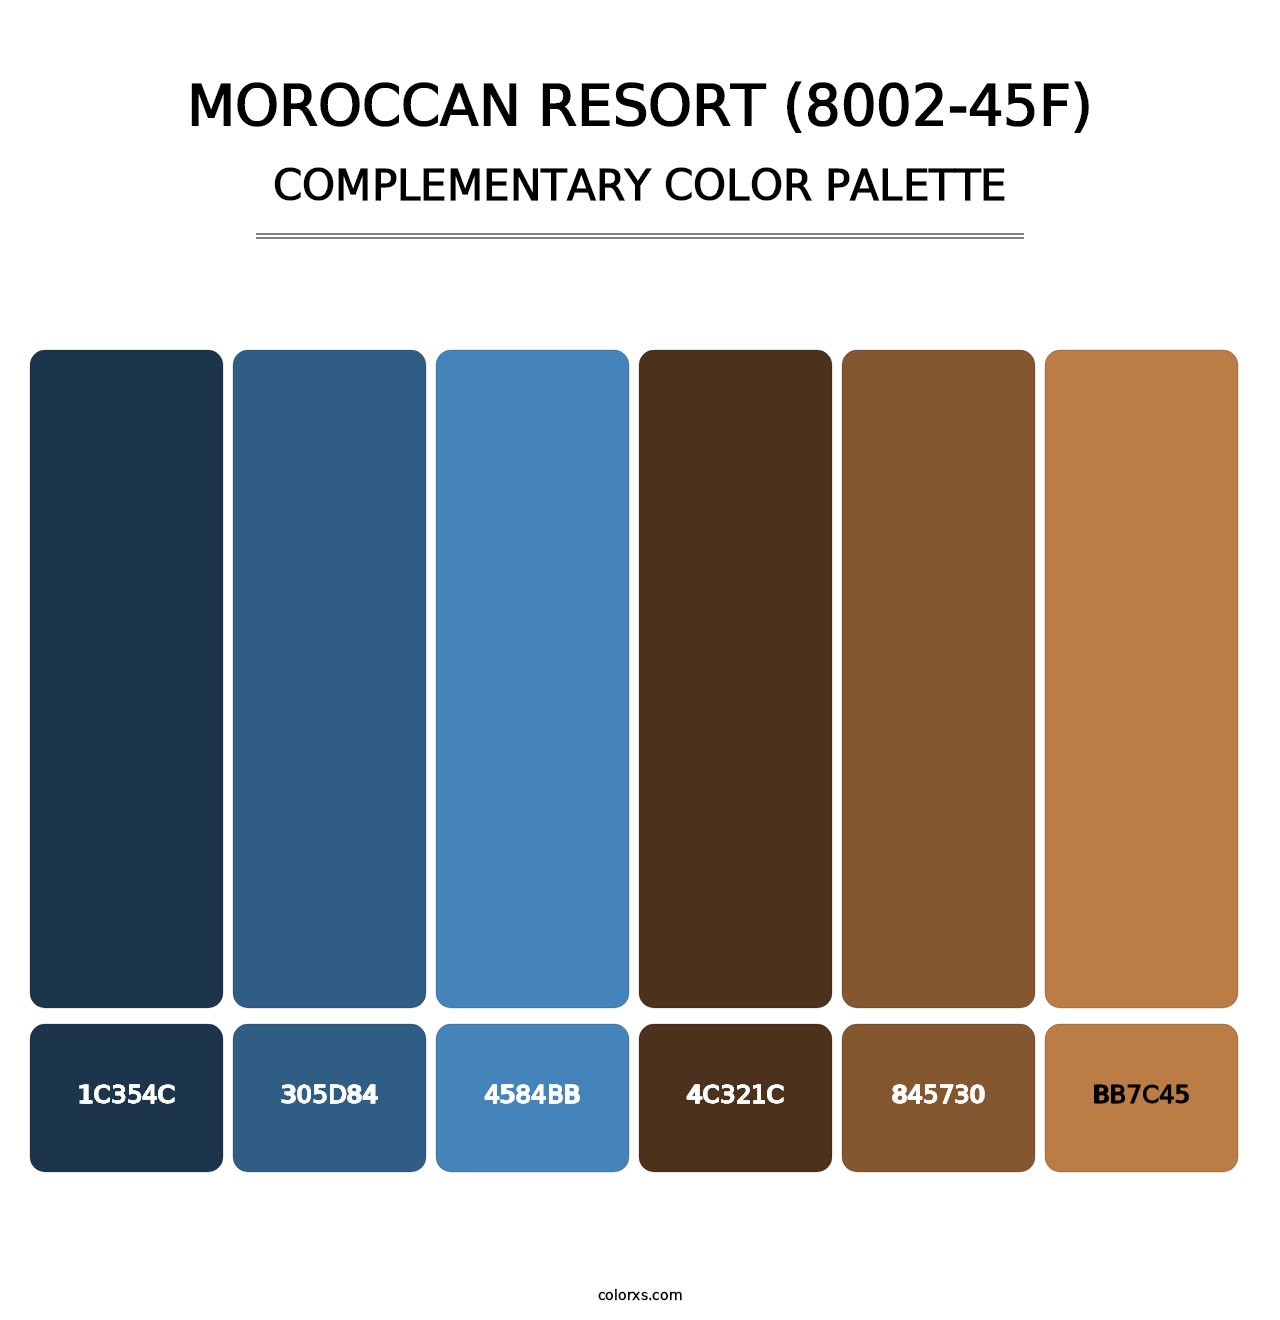 Moroccan Resort (8002-45F) - Complementary Color Palette